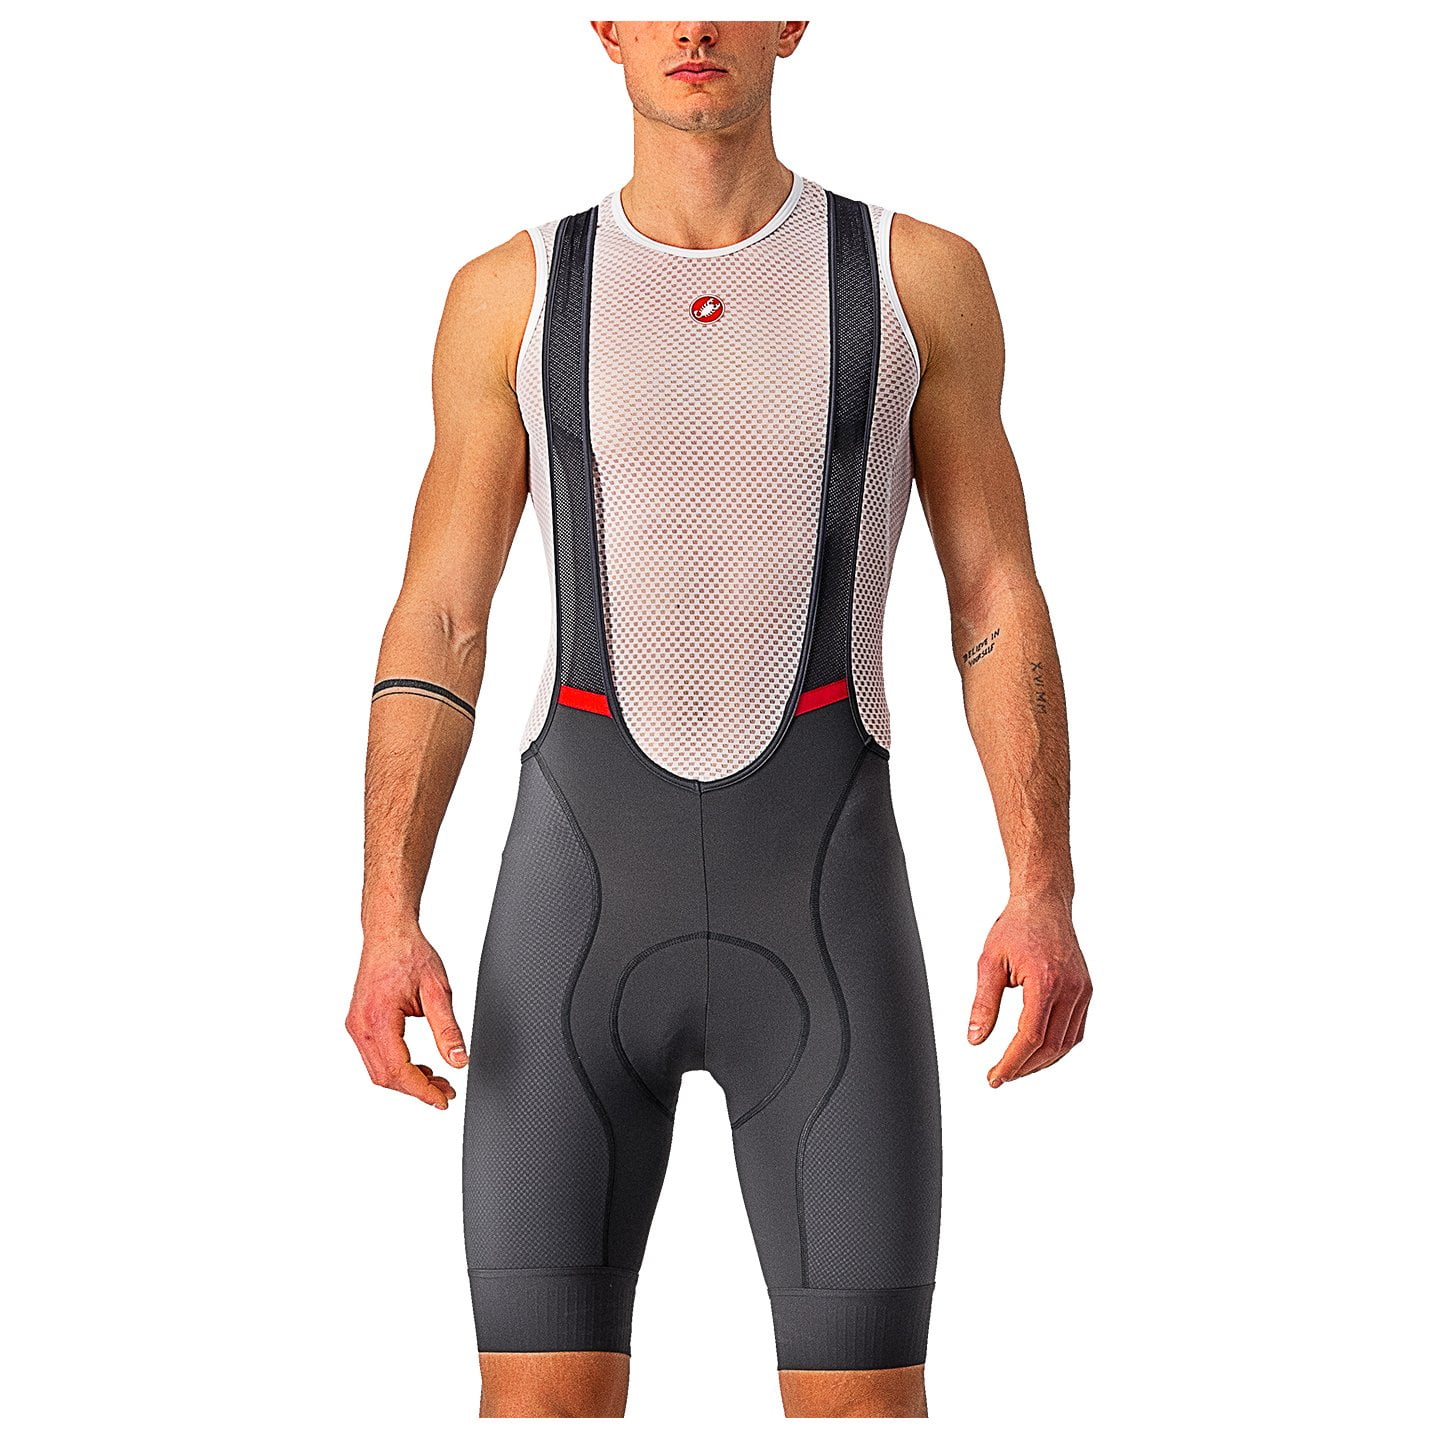 Competizione Bib Shorts Bib Shorts, for men, size S, Cycle trousers, Cycle clothing